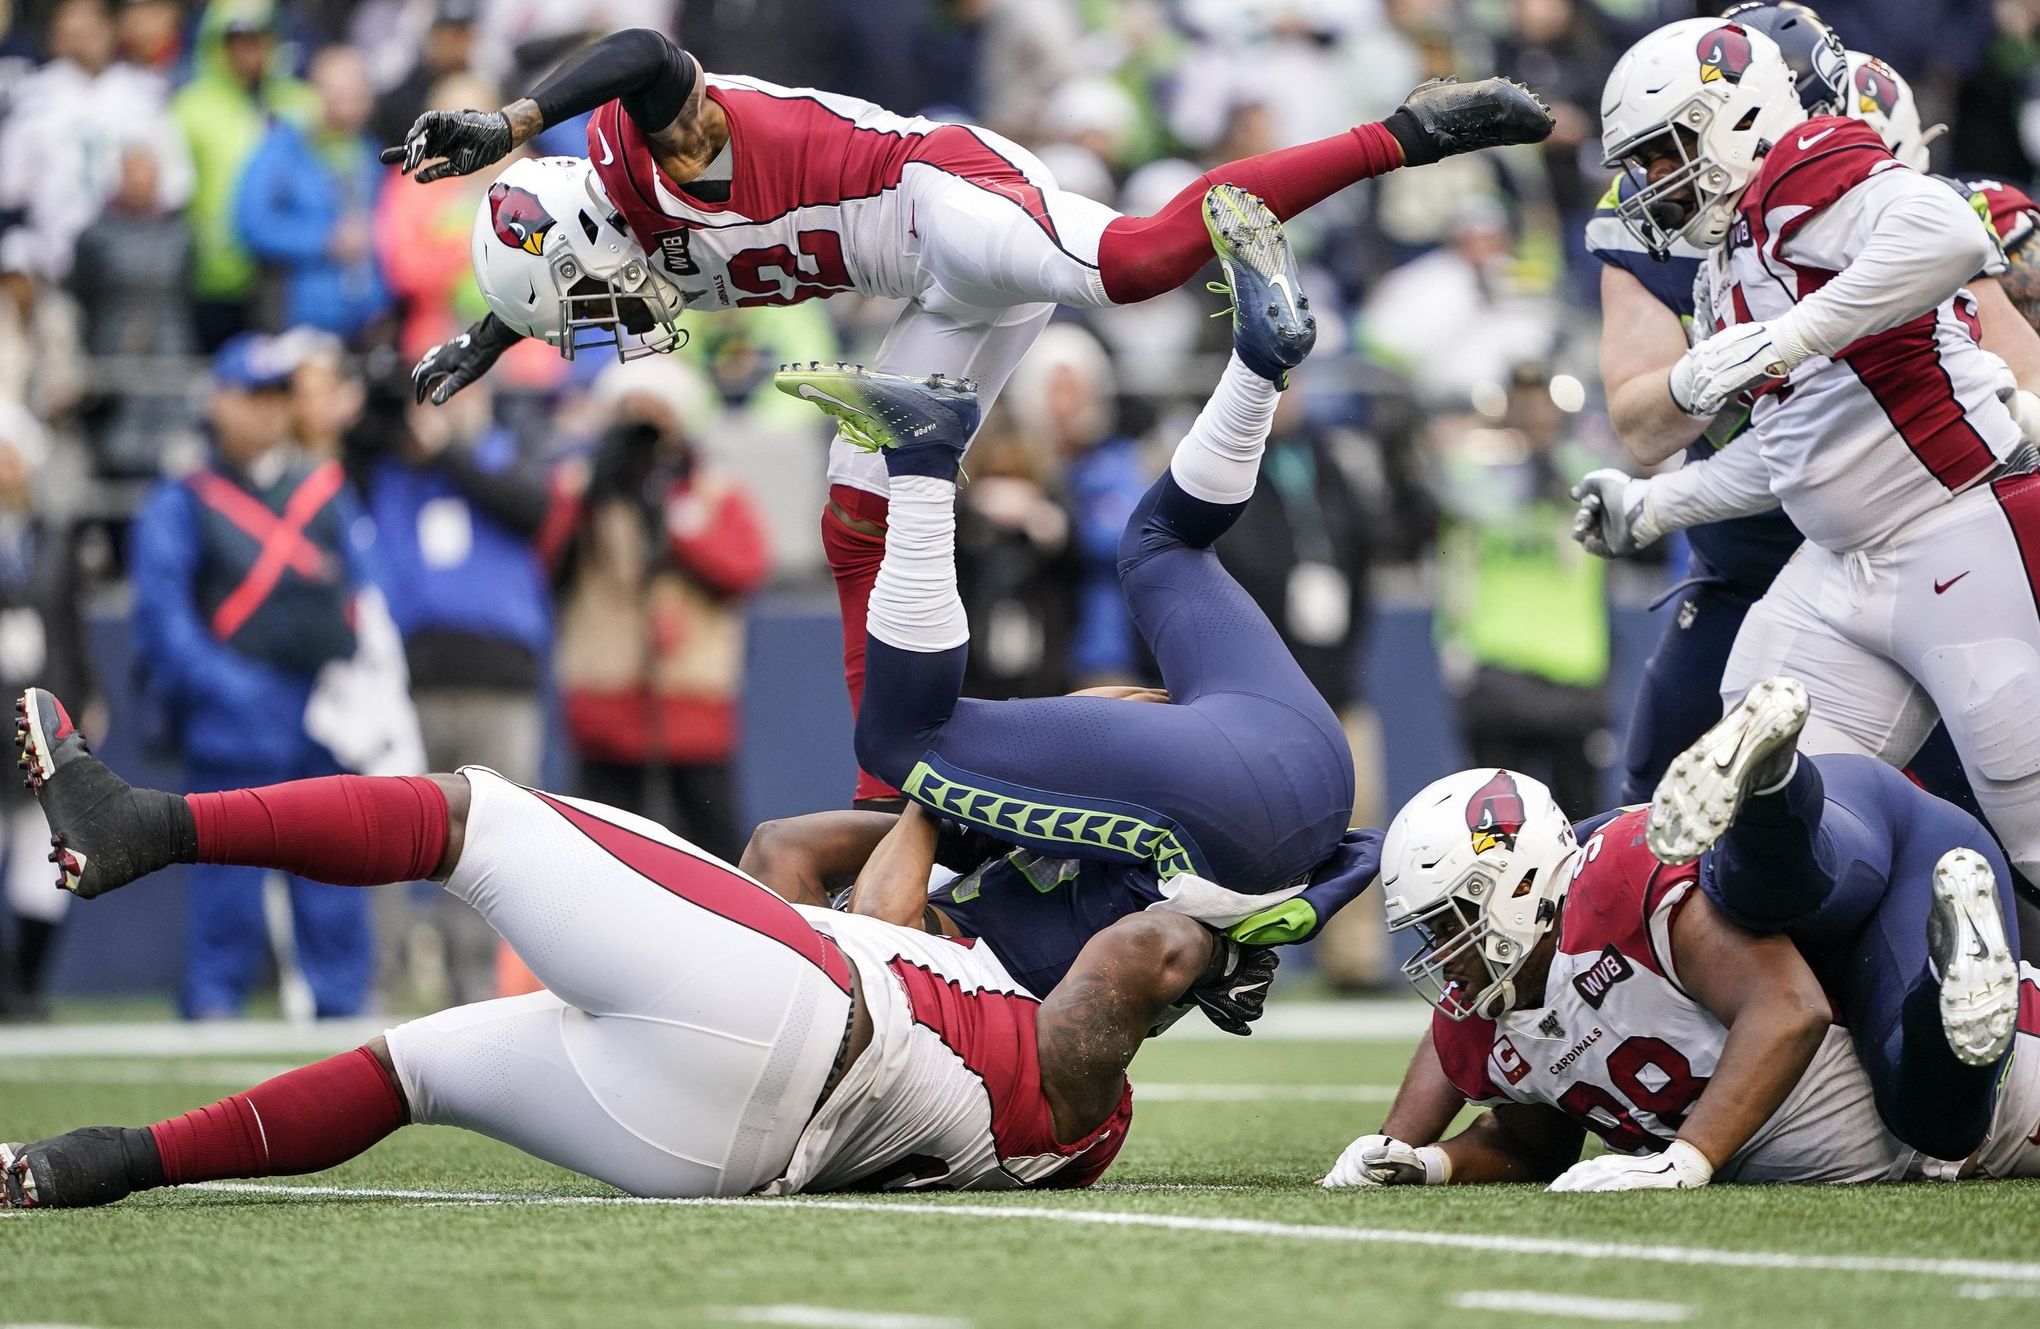 Seahawks-Cardinals GameCenter: Live updates, highlights, how to